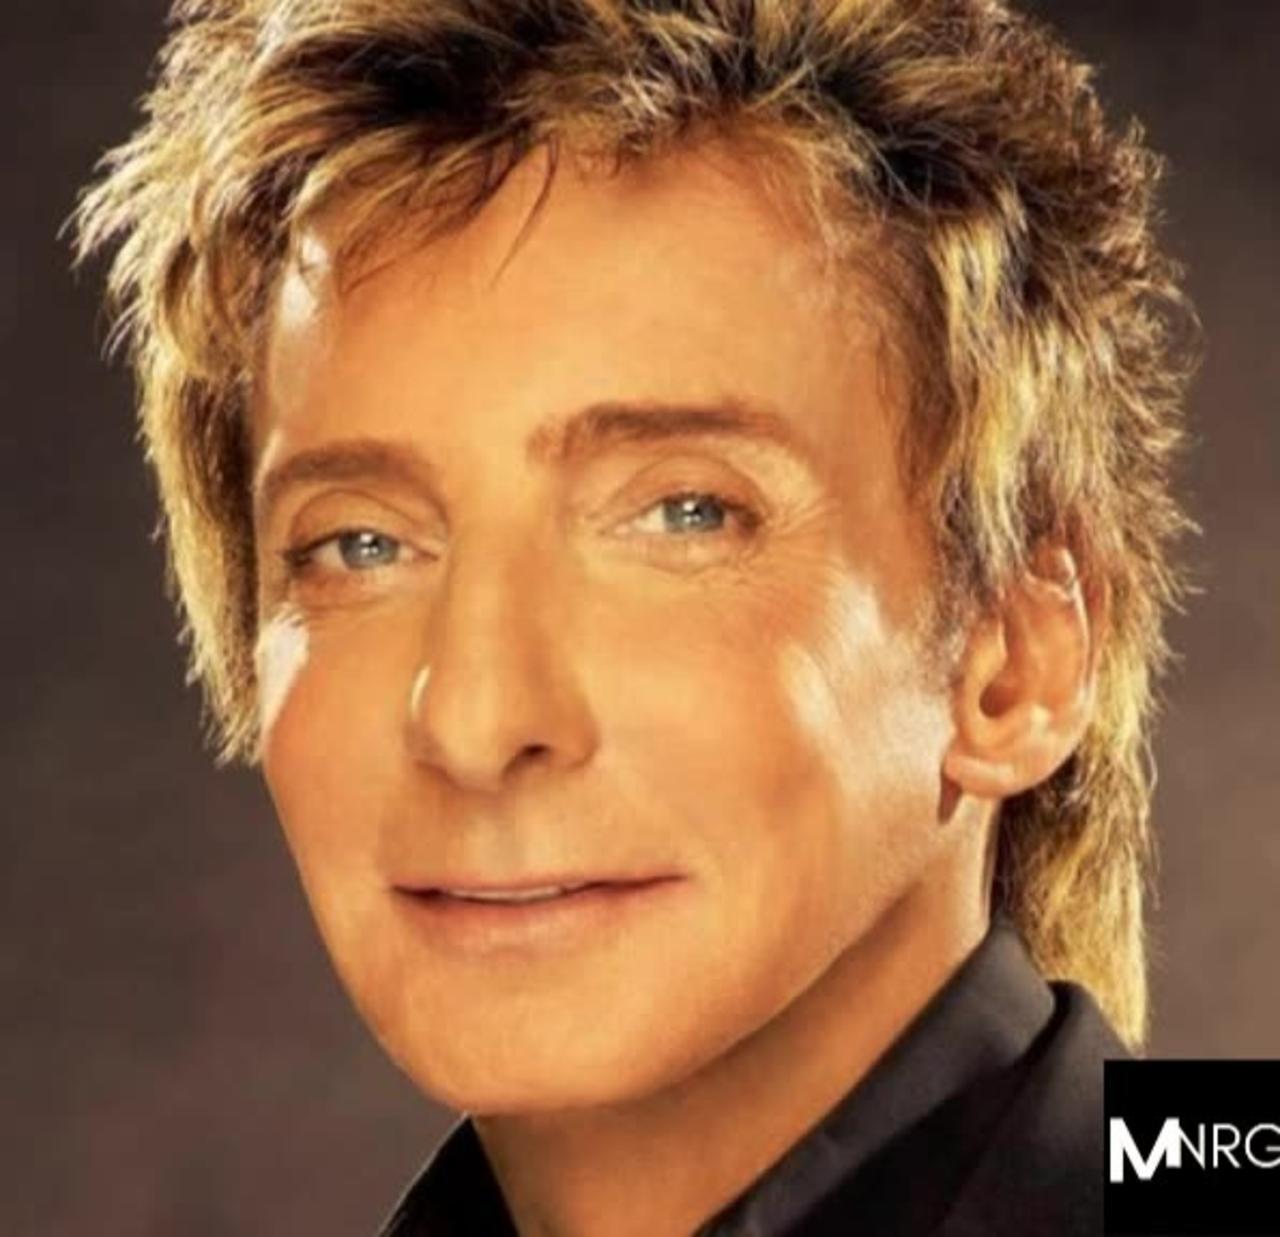 Barry Manilow - Come Monday 432